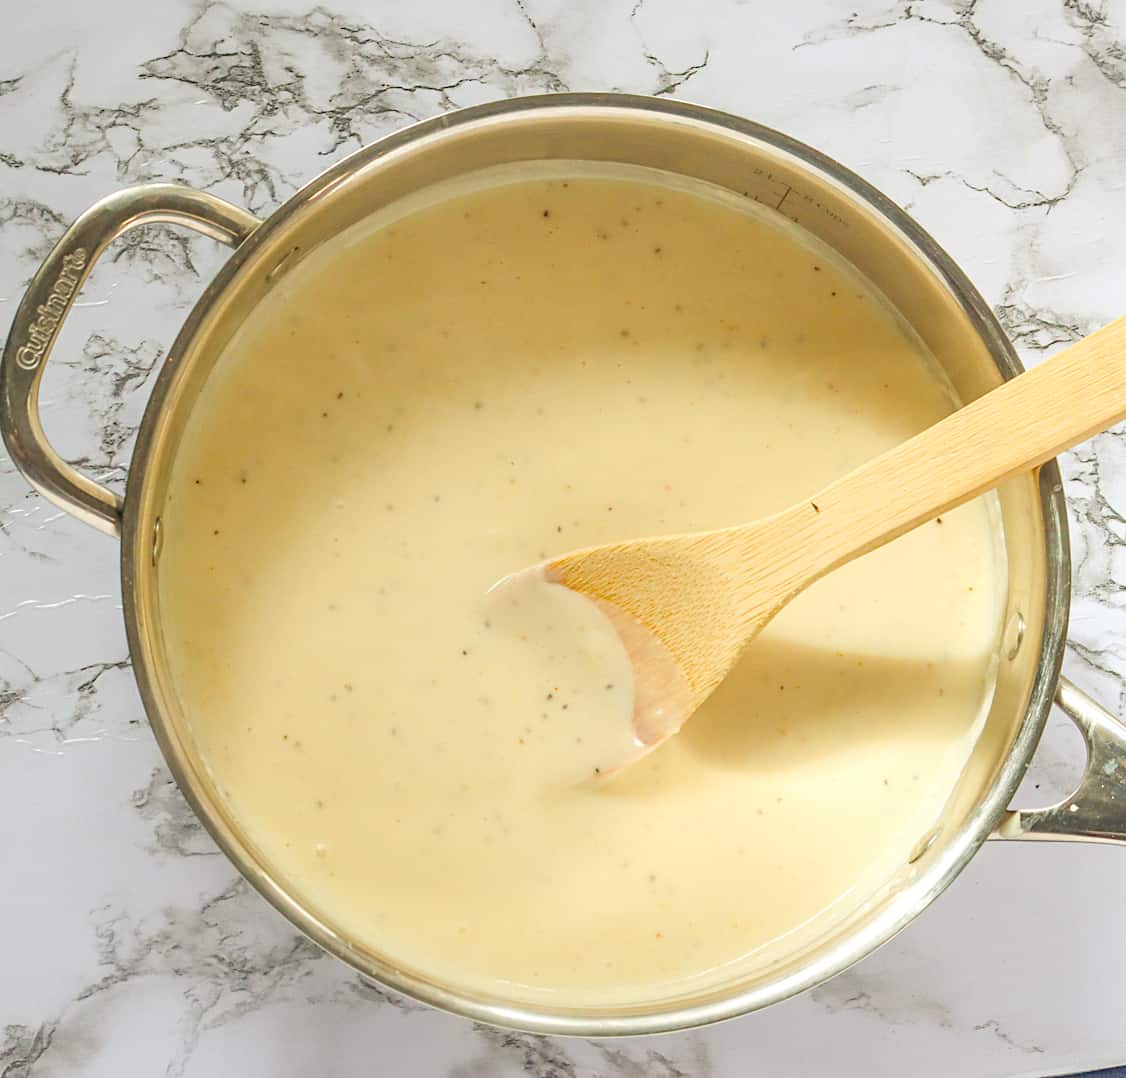 Delicious white gravy right off the stove in 15 minutes